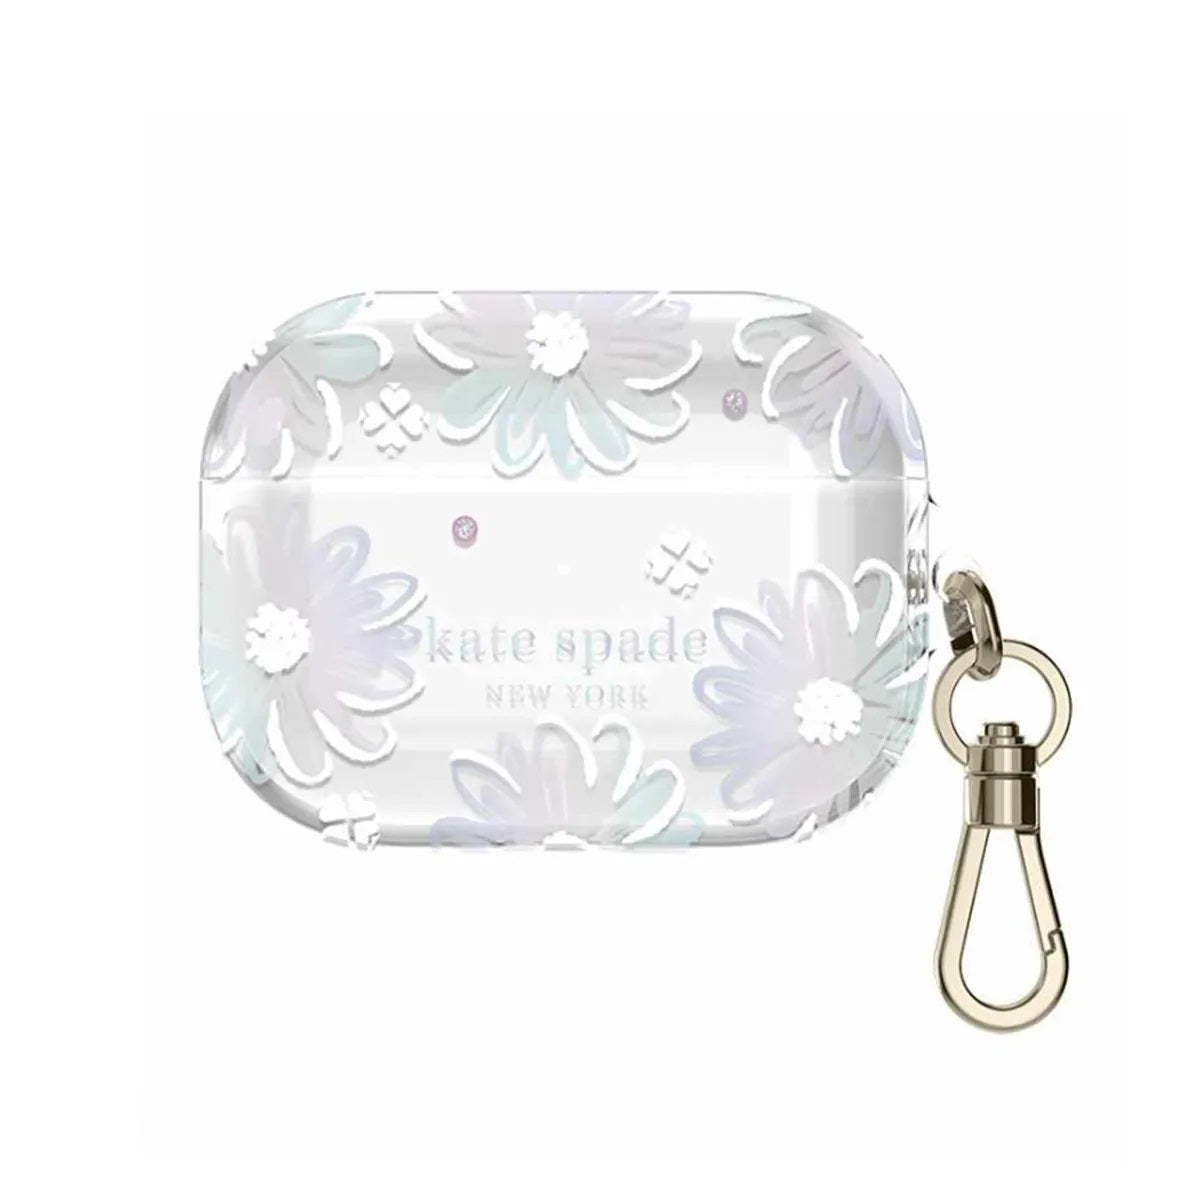 Kate Spade New York Protective AirPods Pro Case (Daisy Iridescent Foil/White/Clear)